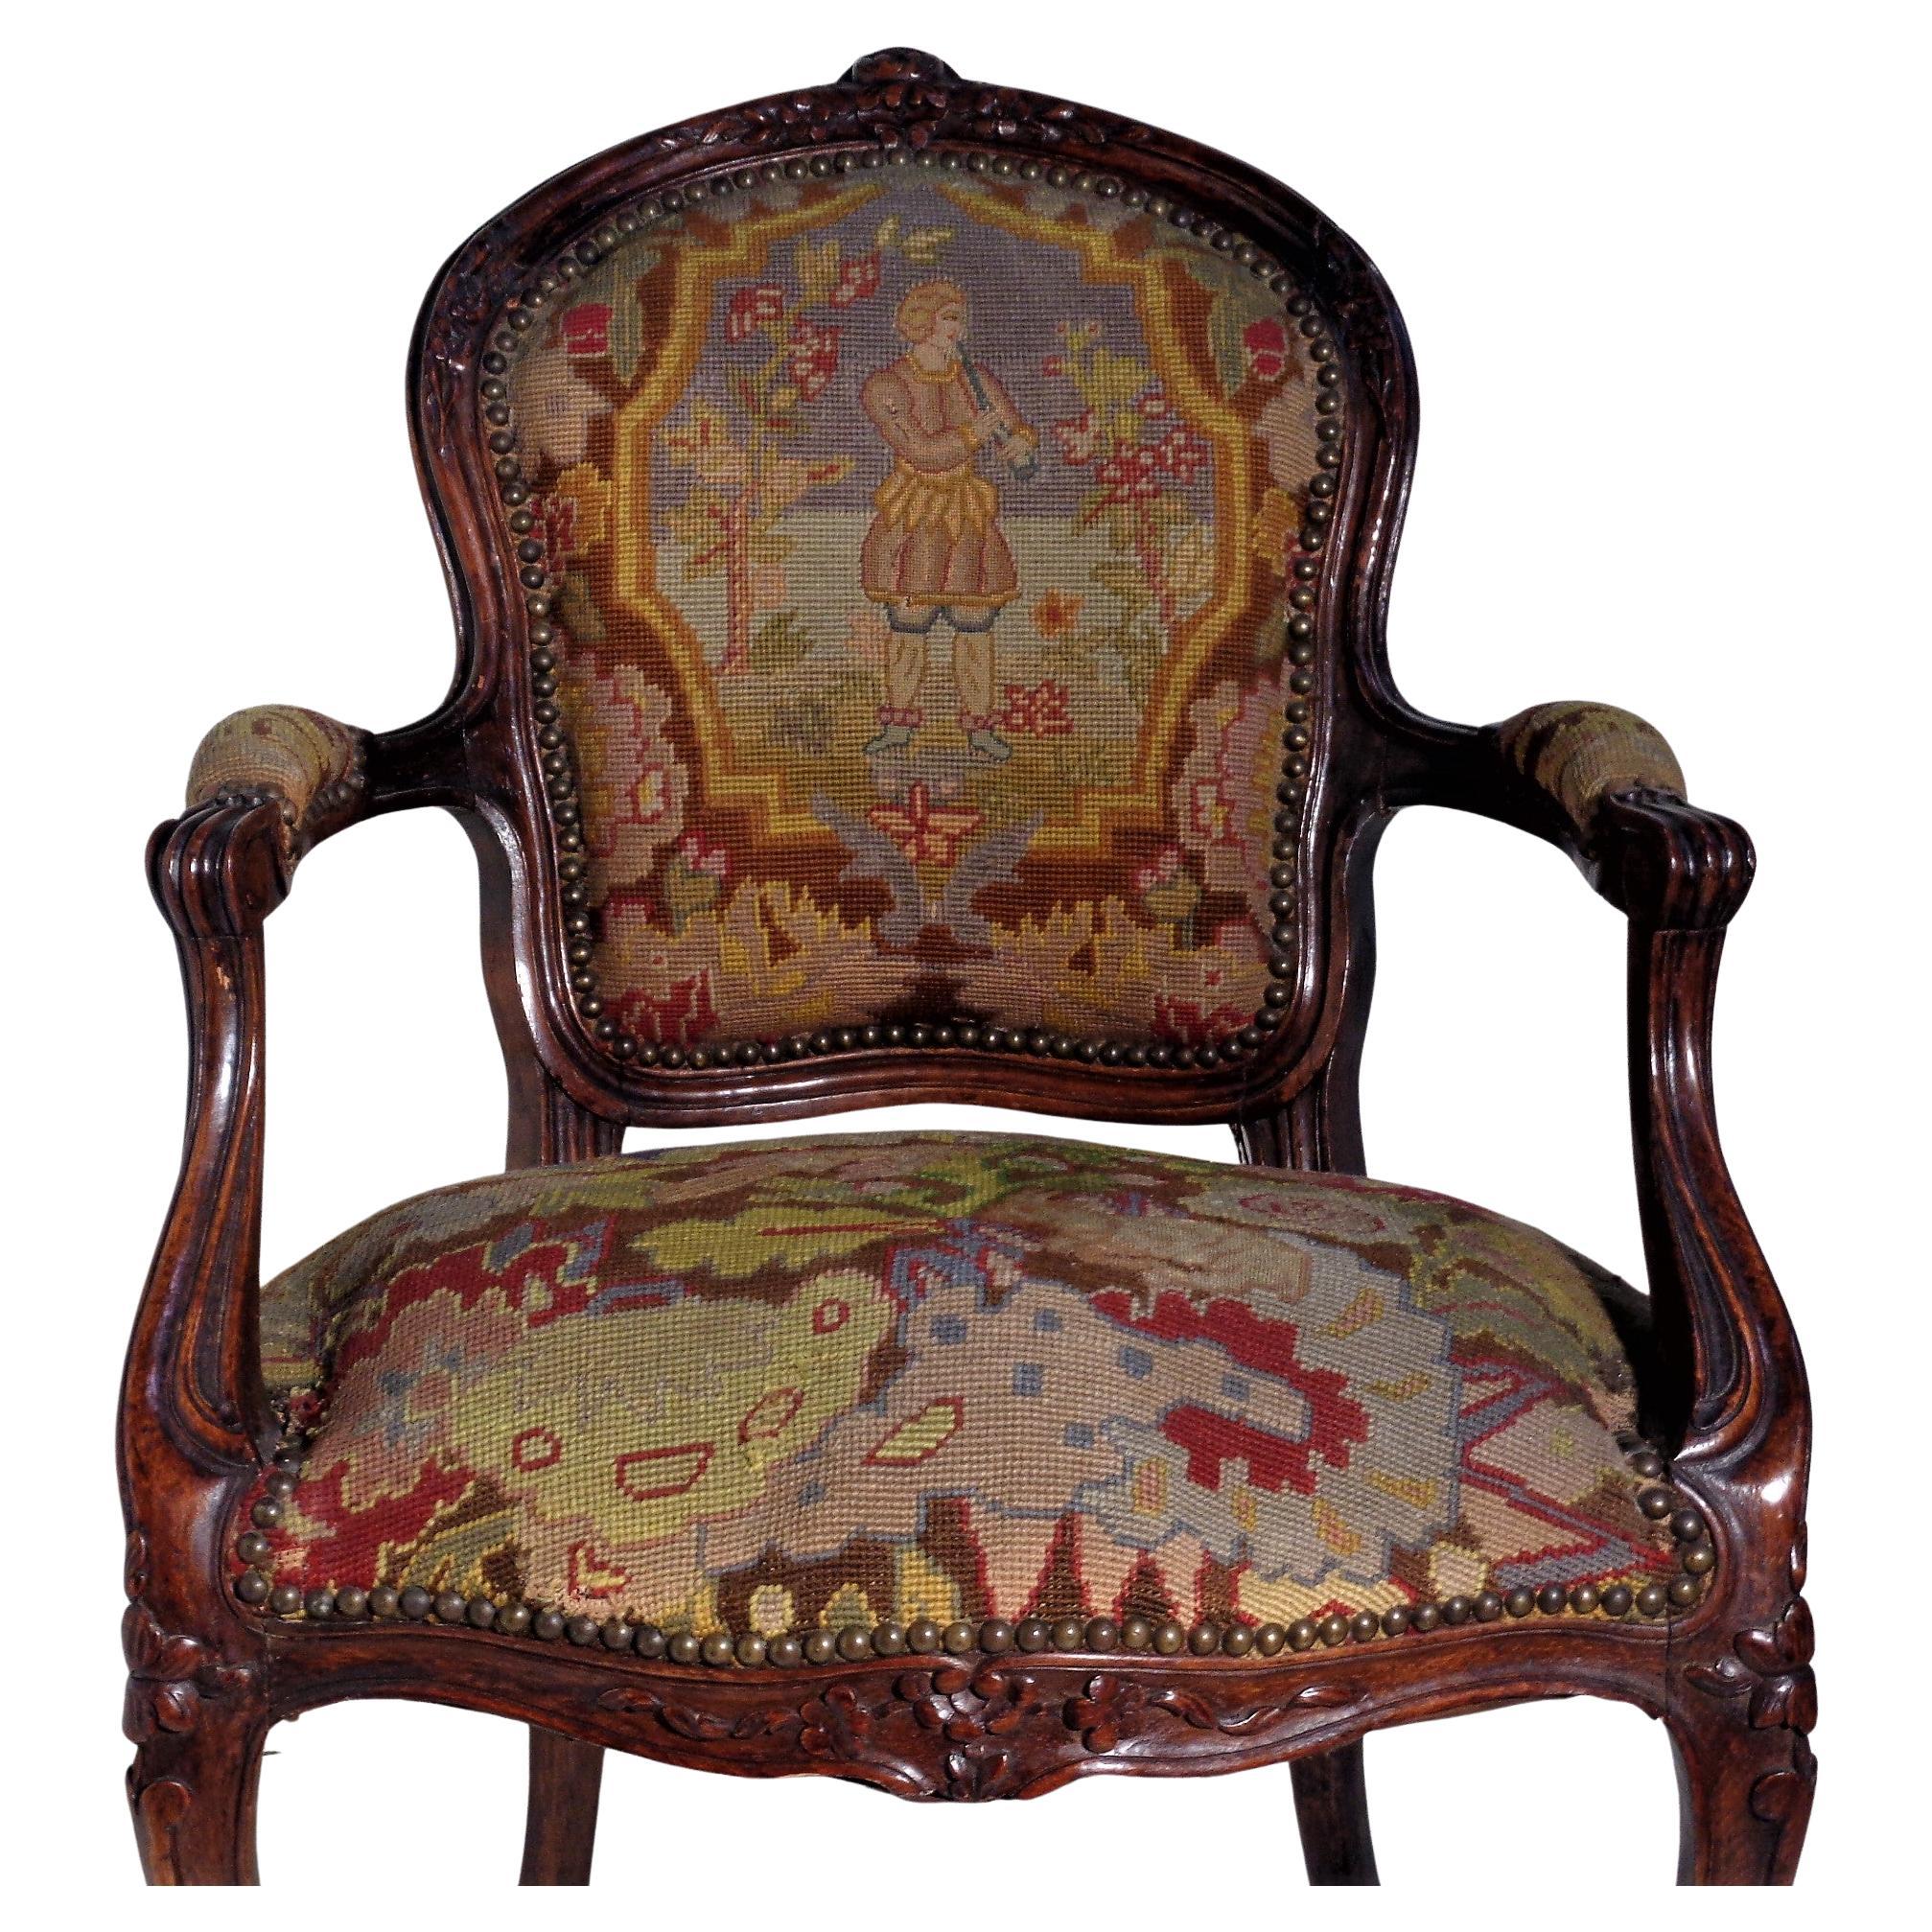 19th century French Louis XV style carved beech wood fauteuil covered in the original grospoint tapestry decorated w/ sheep, bird, figure in landscape, floral and fully surrounded brass nail head trim. Overall beautifully aged rich color. Circa